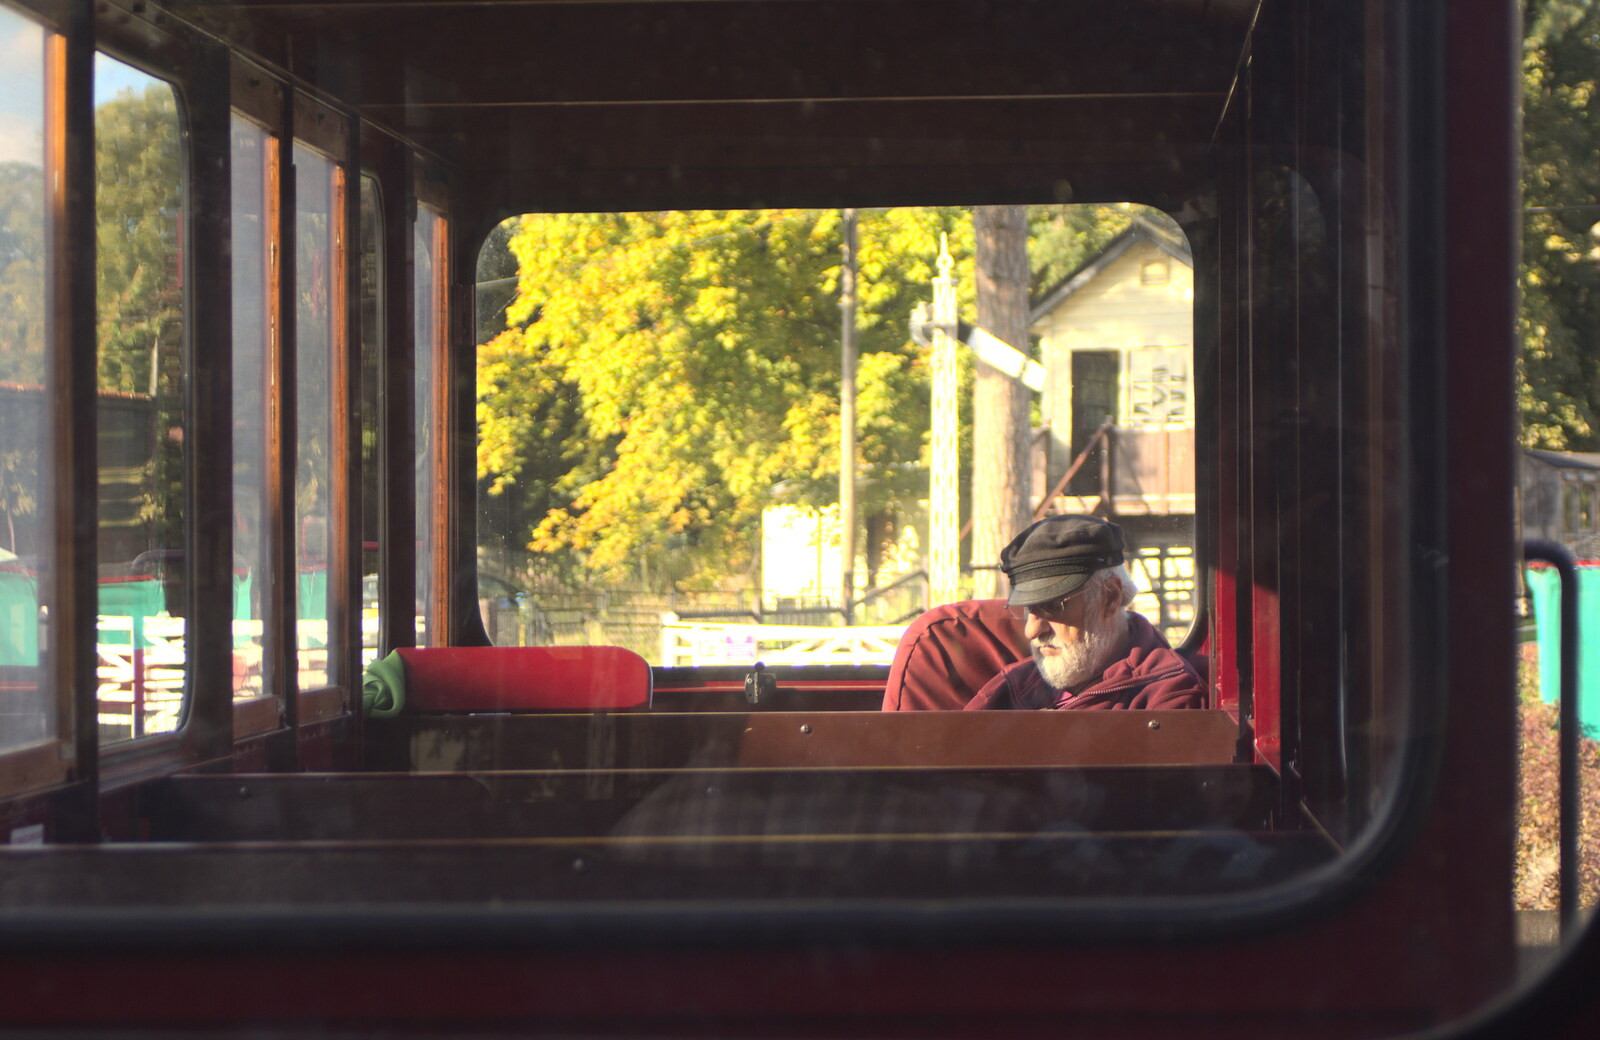 The conductor waits at the back of the train from Alan Bloom's Gardens, Bressingham, Norfolk - 6th October 2012